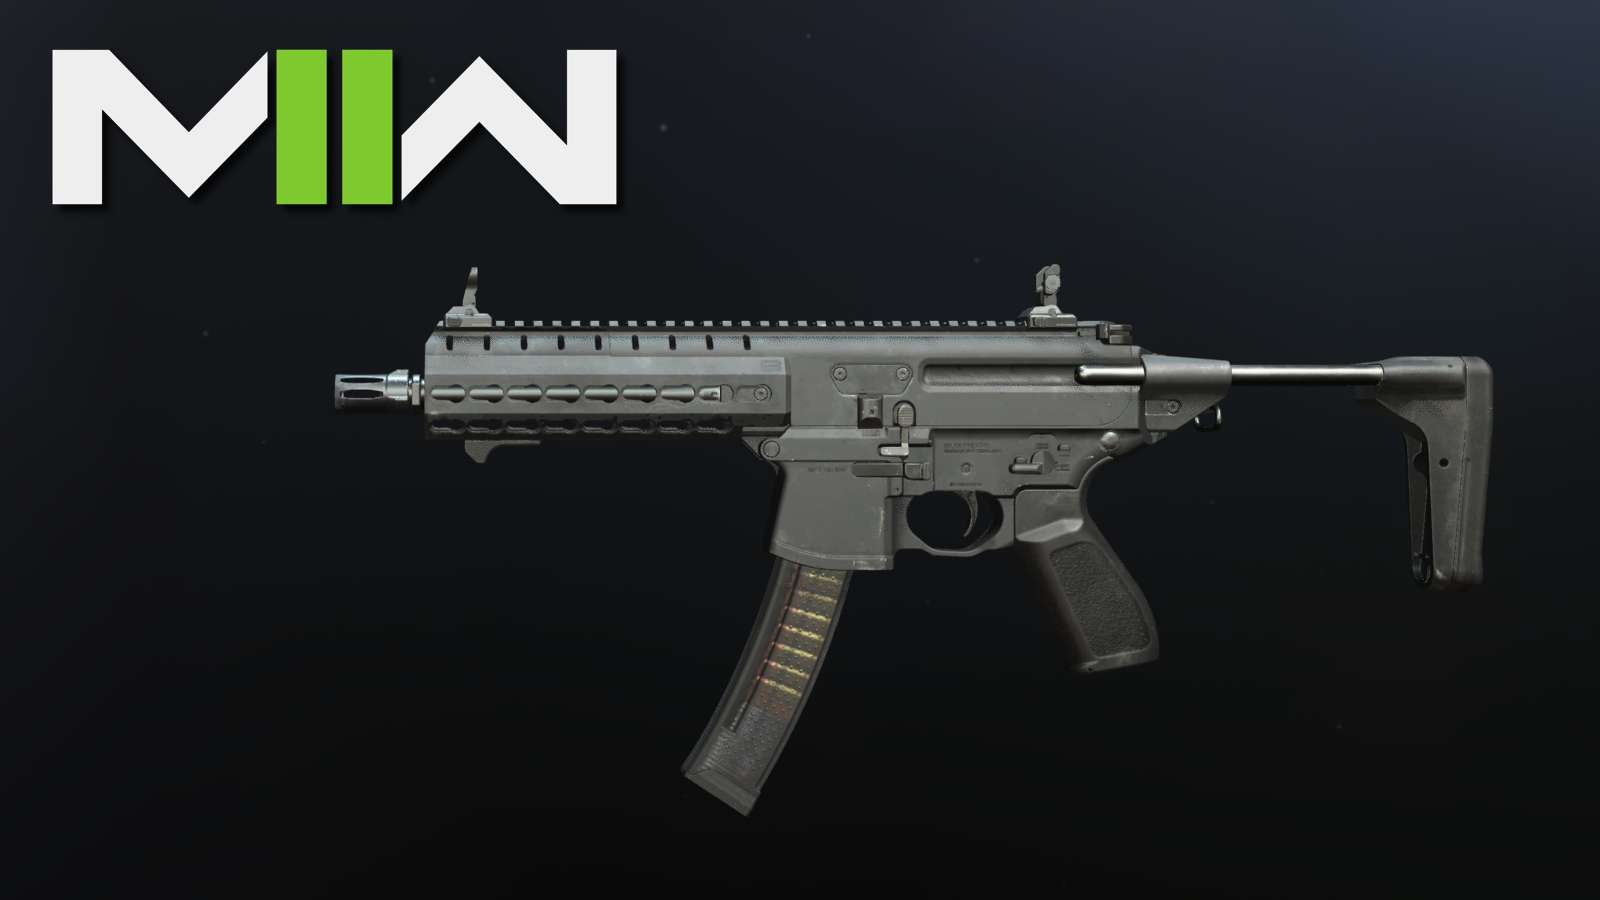 bas-p smg preview from mw2 with game logo in top left corner.